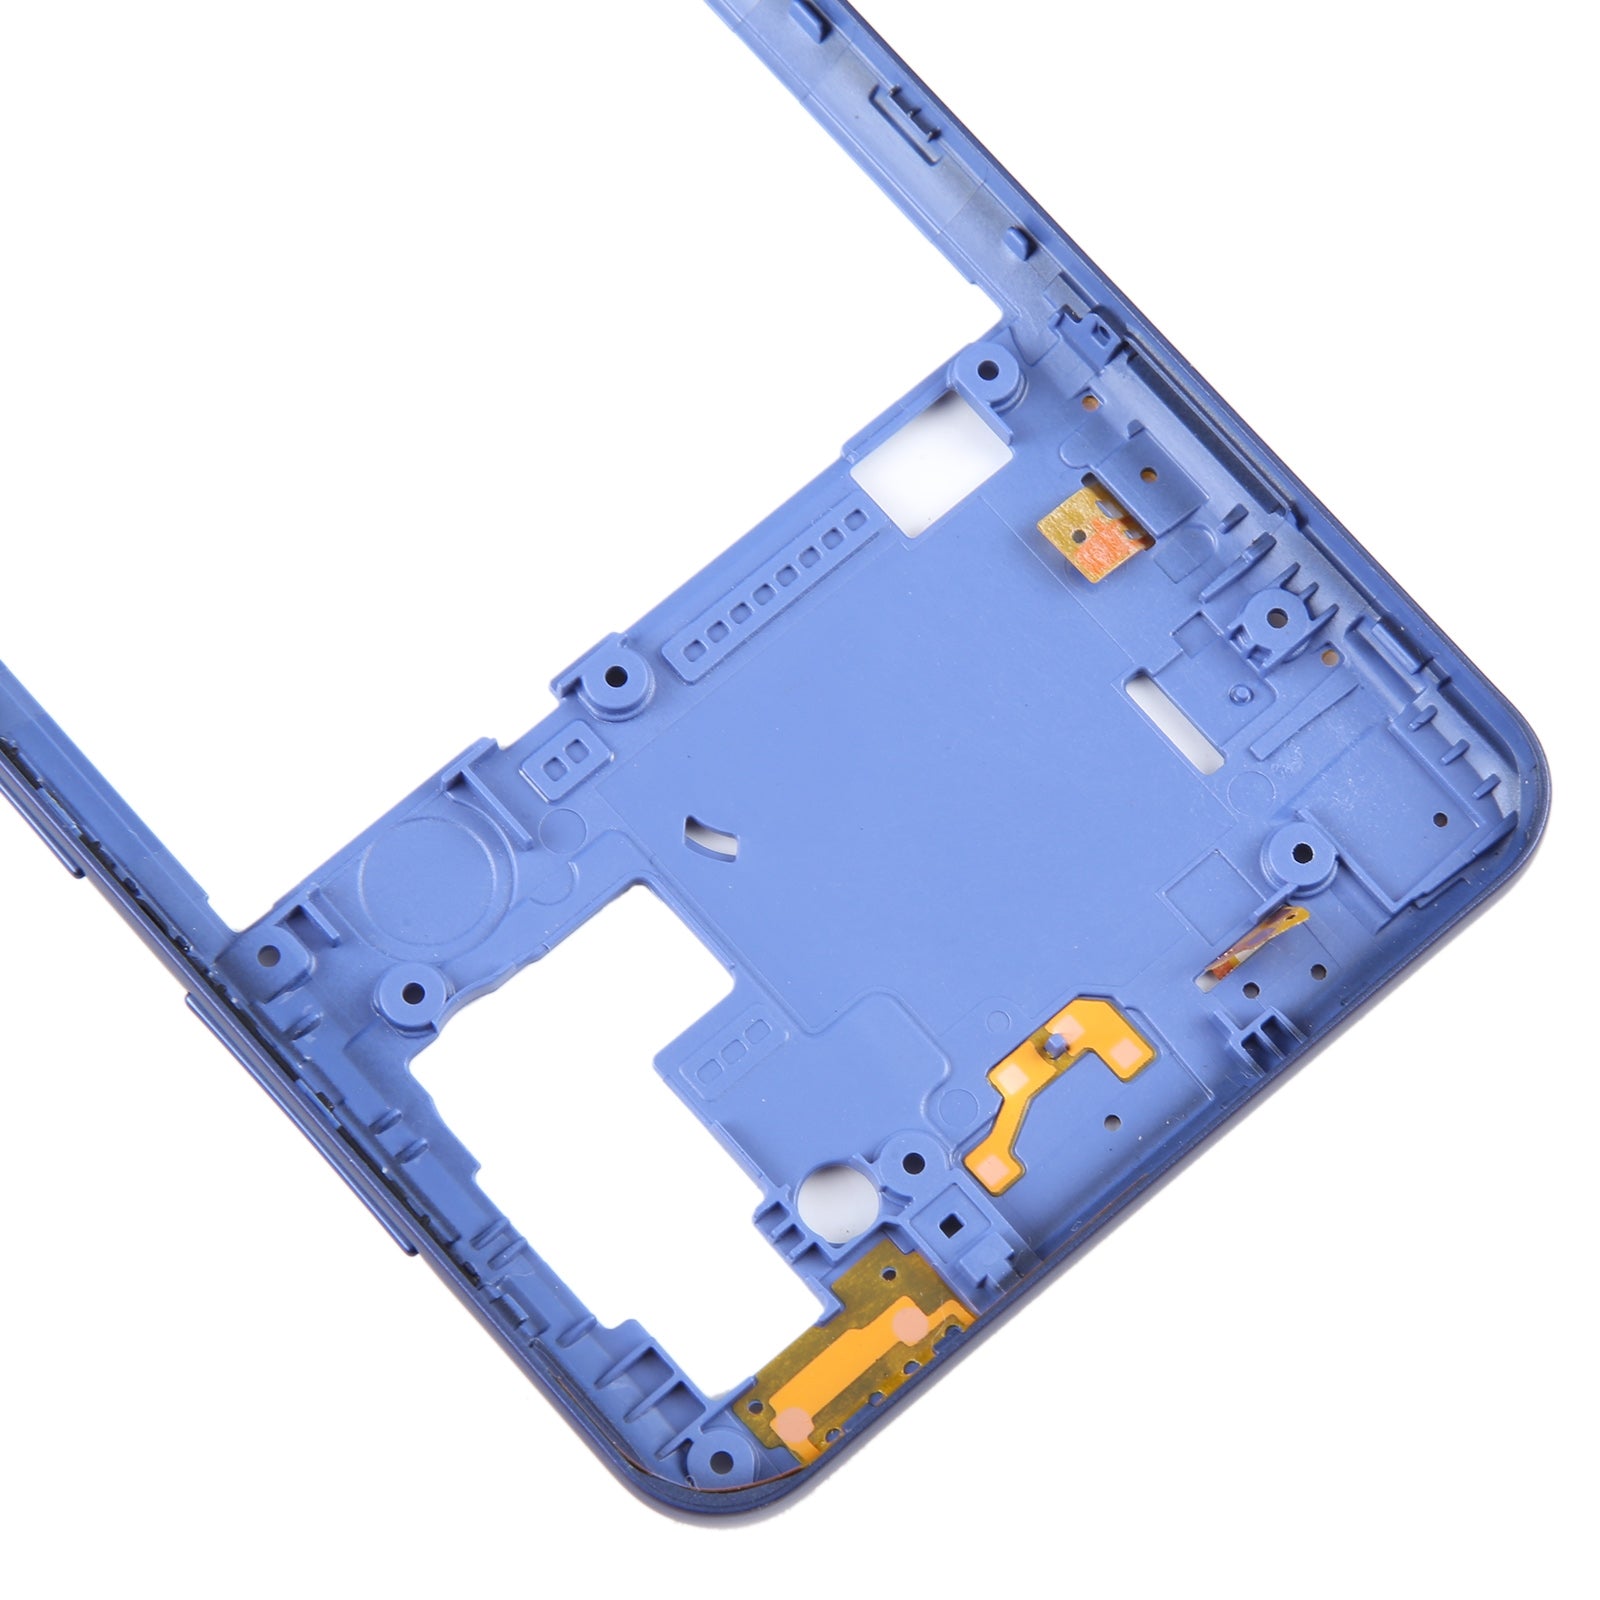 Chassis Back Cover Frame Samsung Galaxy A21s Blue